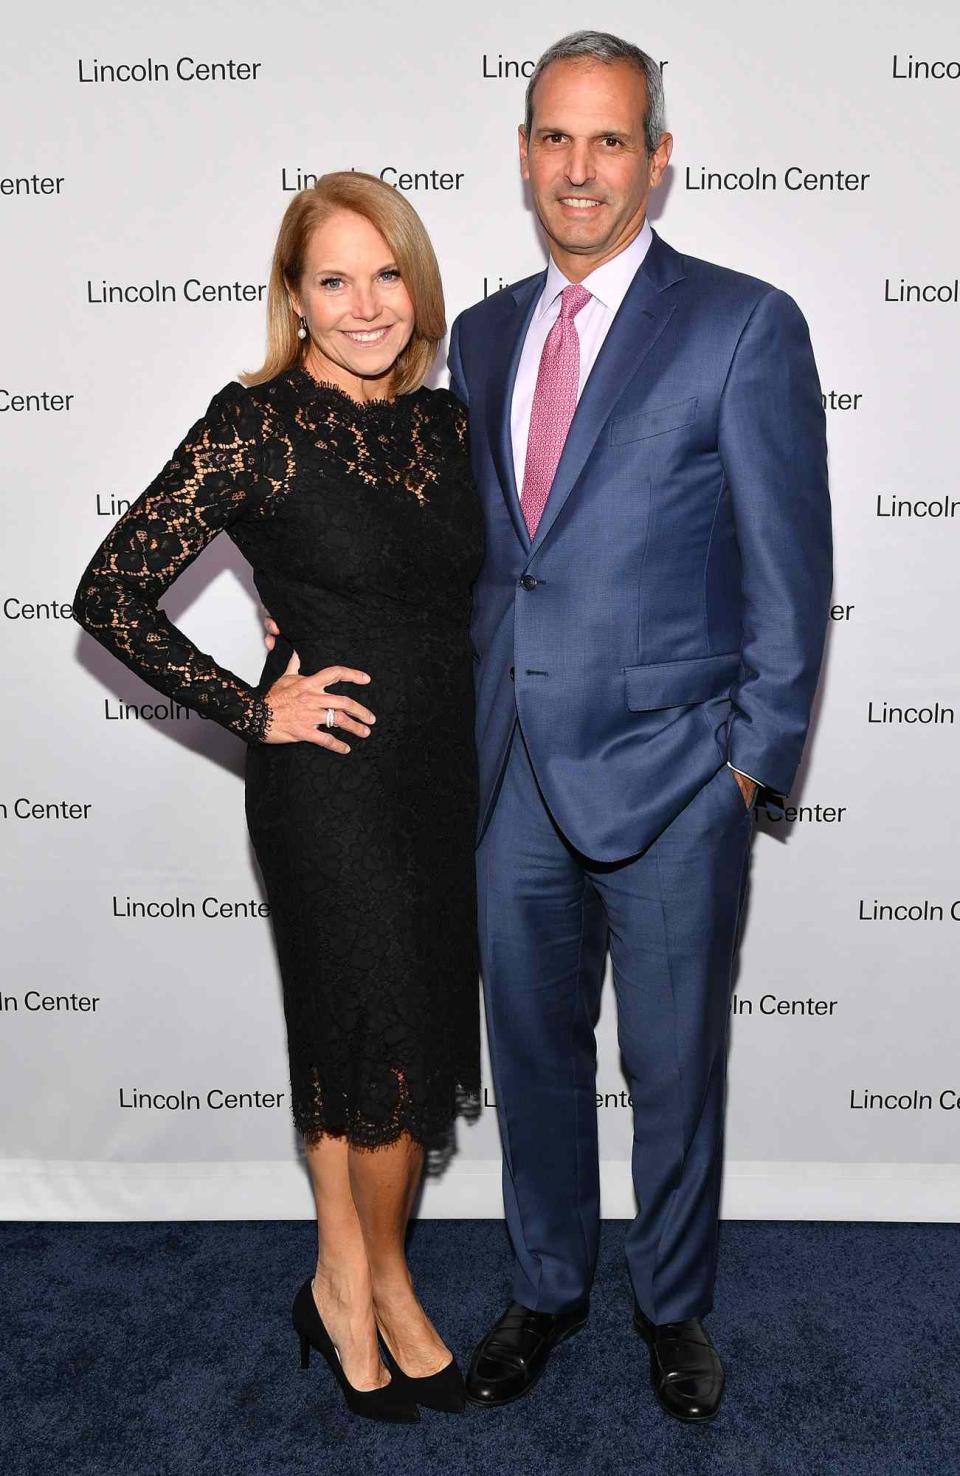 Katie Couric and John Molner attend Lincoln Center Fall Gala at Alice Tully Hall on October 24, 2018 in New York City